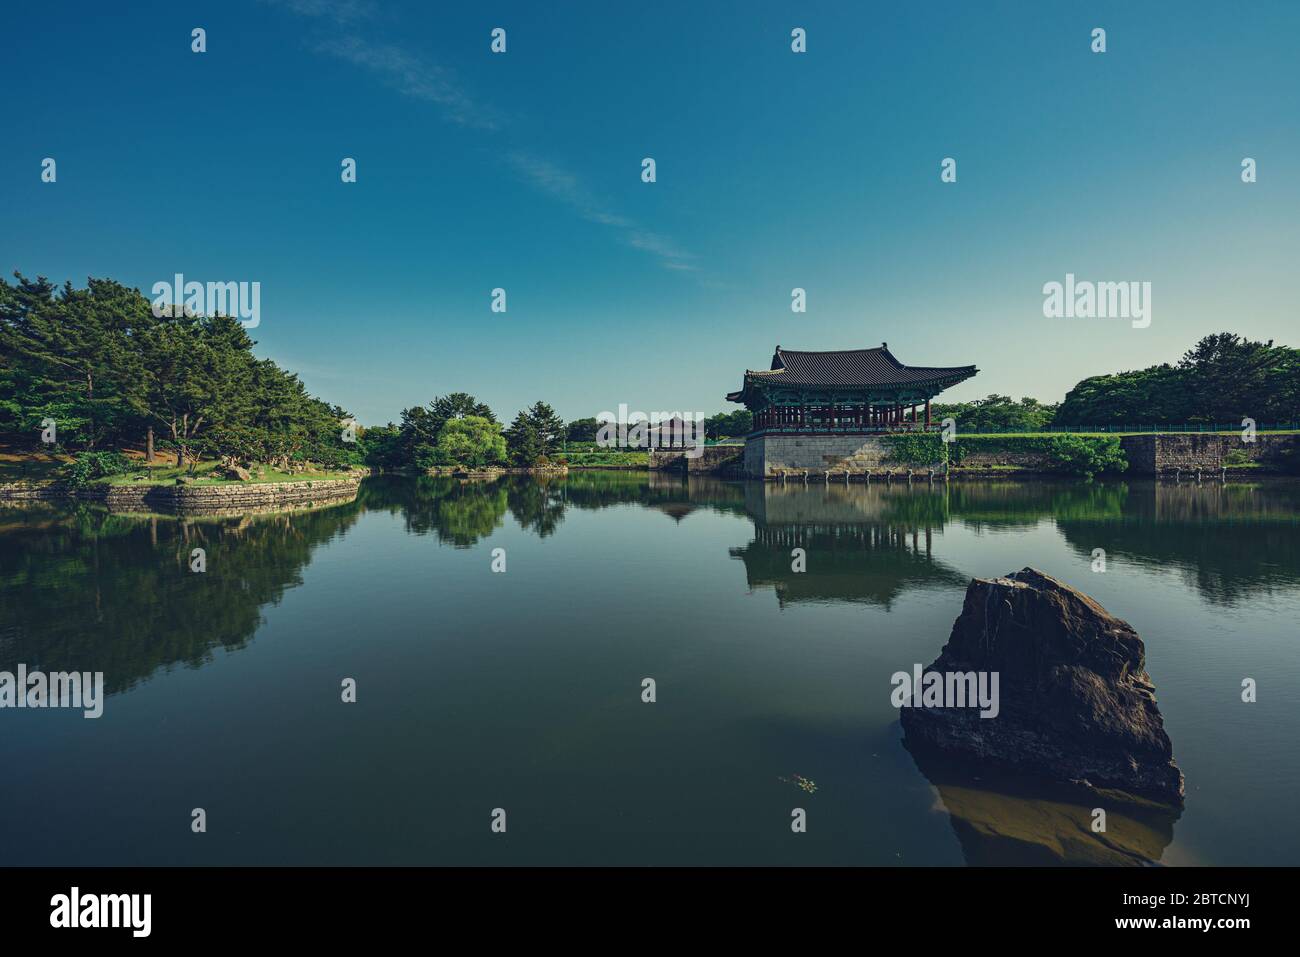 Gyeongju, South Korea - 22 May 2020: Donggung Palace and Wolji Pond, formerly known as Anapji is another popular destination in Gyeongju. Stock Photo